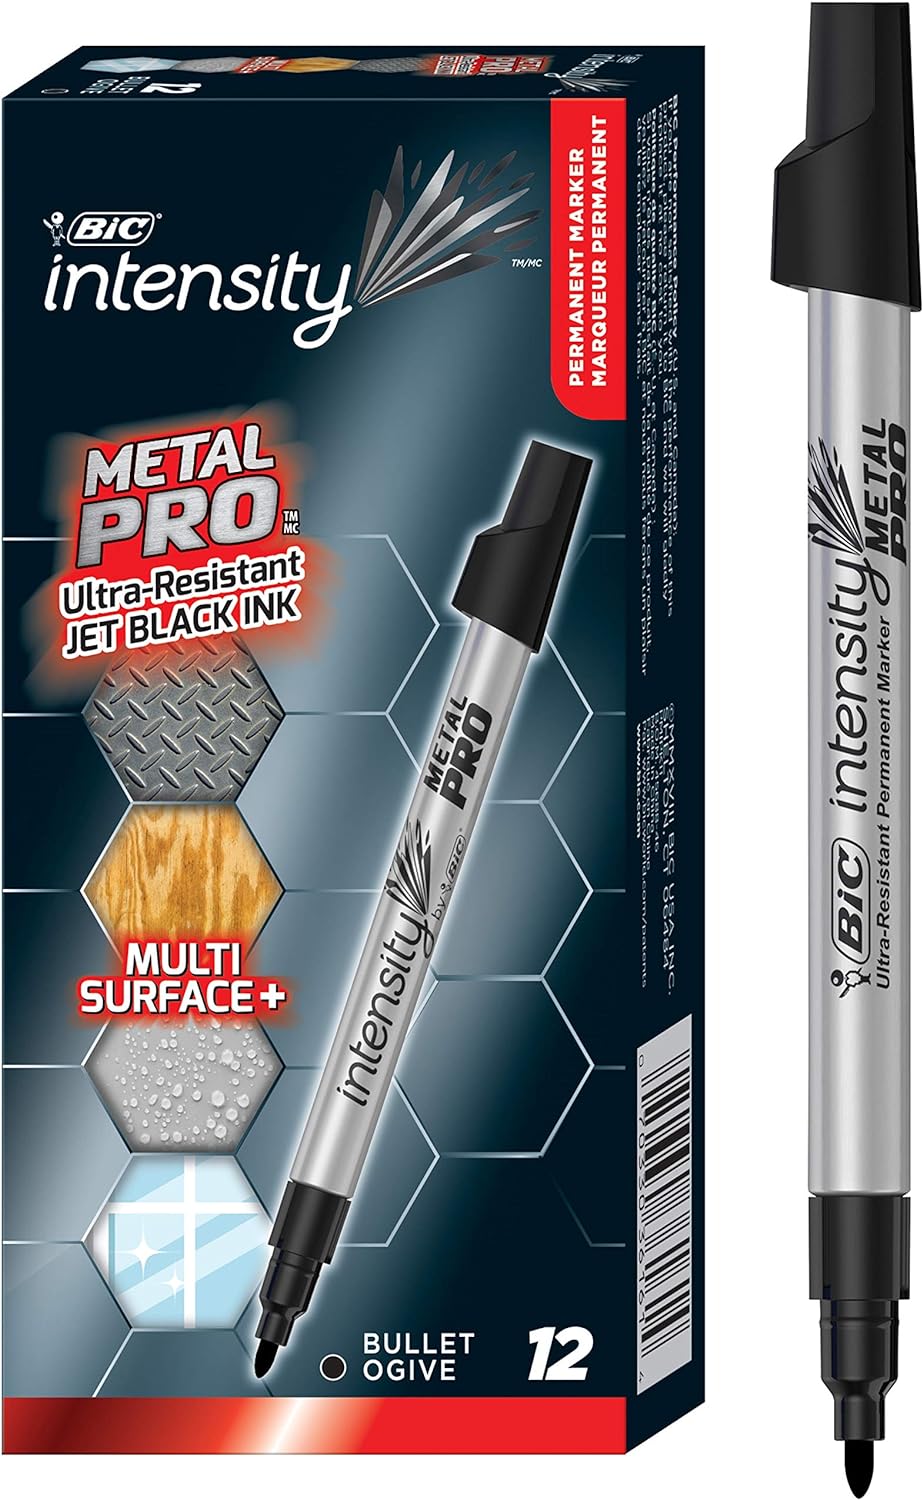 This pen is the best permanent markers and I have tried many brands. My inspector uses for his certification stickers and he said they worked great. I will continue buying theseprns. Thank you for great product.